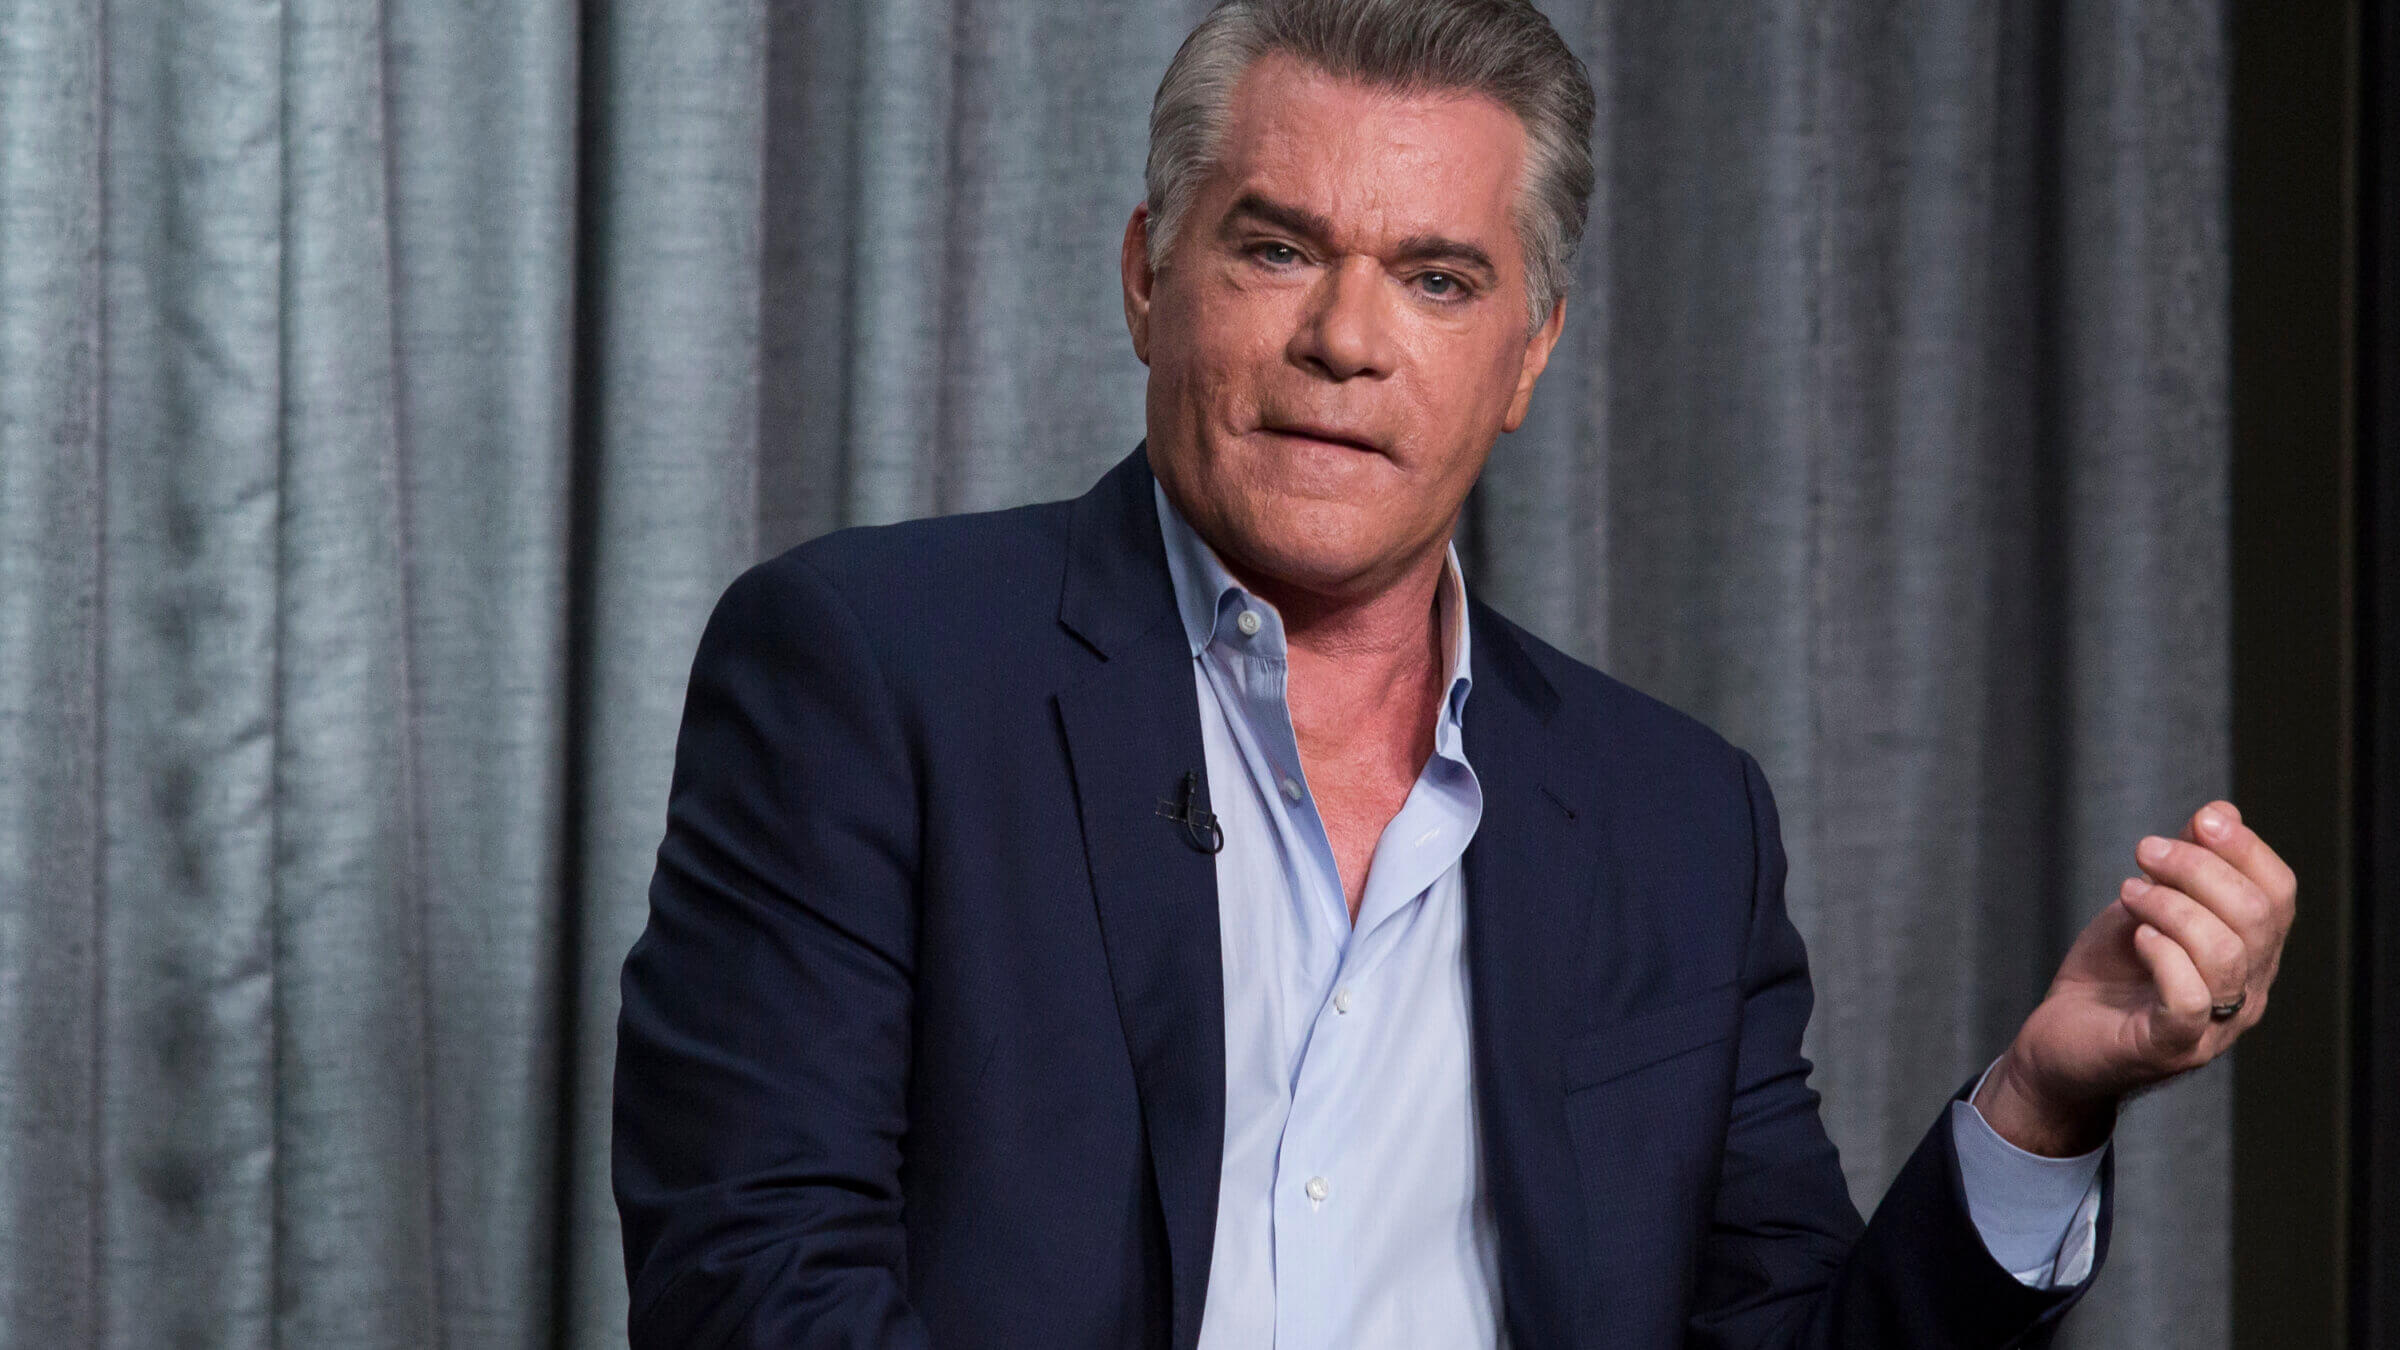 'Goodfellas' star Ray Liotta died Thursday at the age of 67.